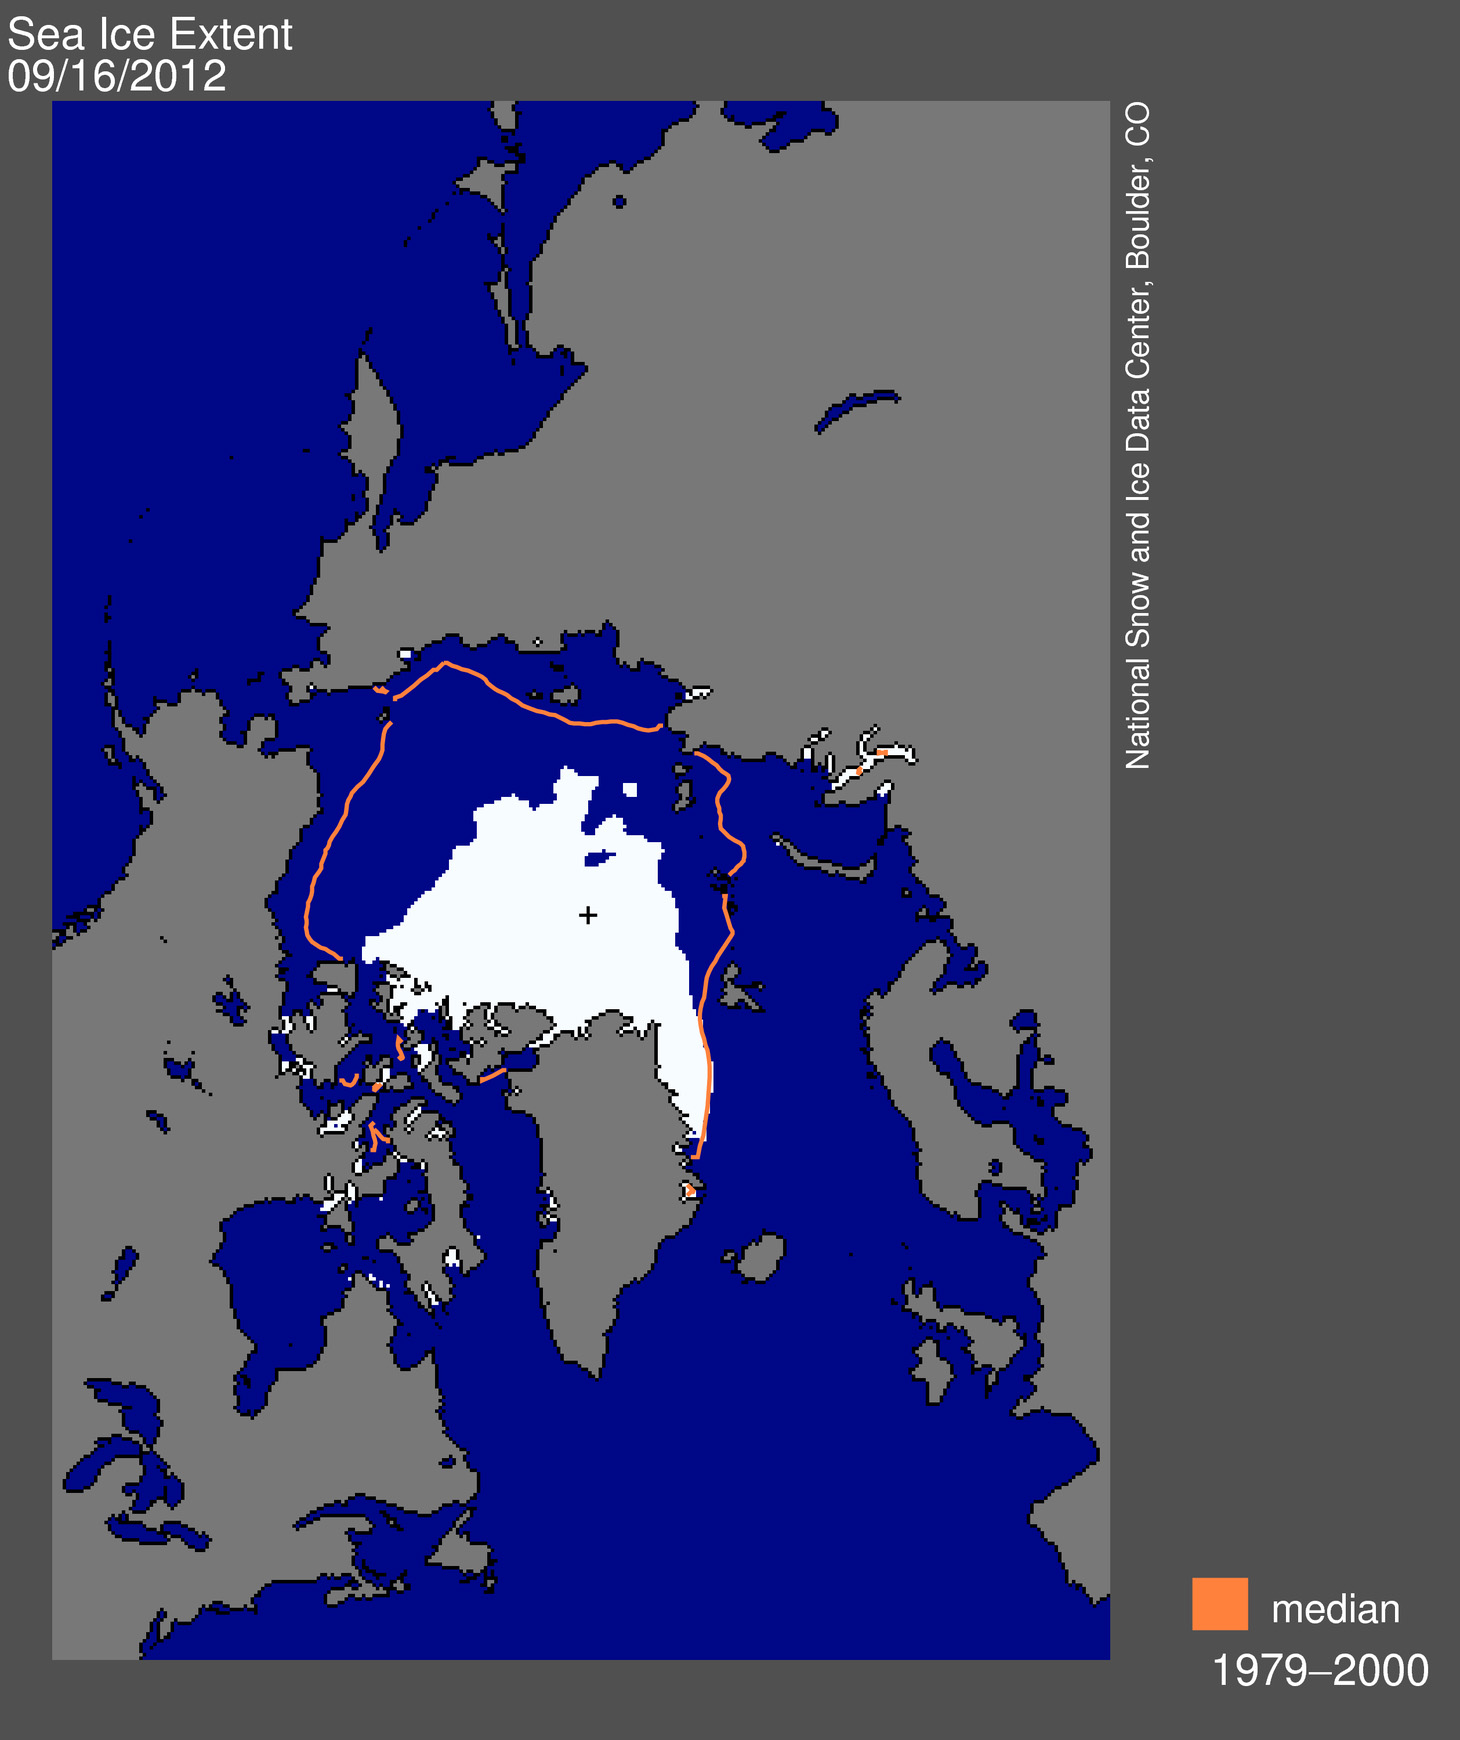 Arctic sea ice extent for September 16, 2012